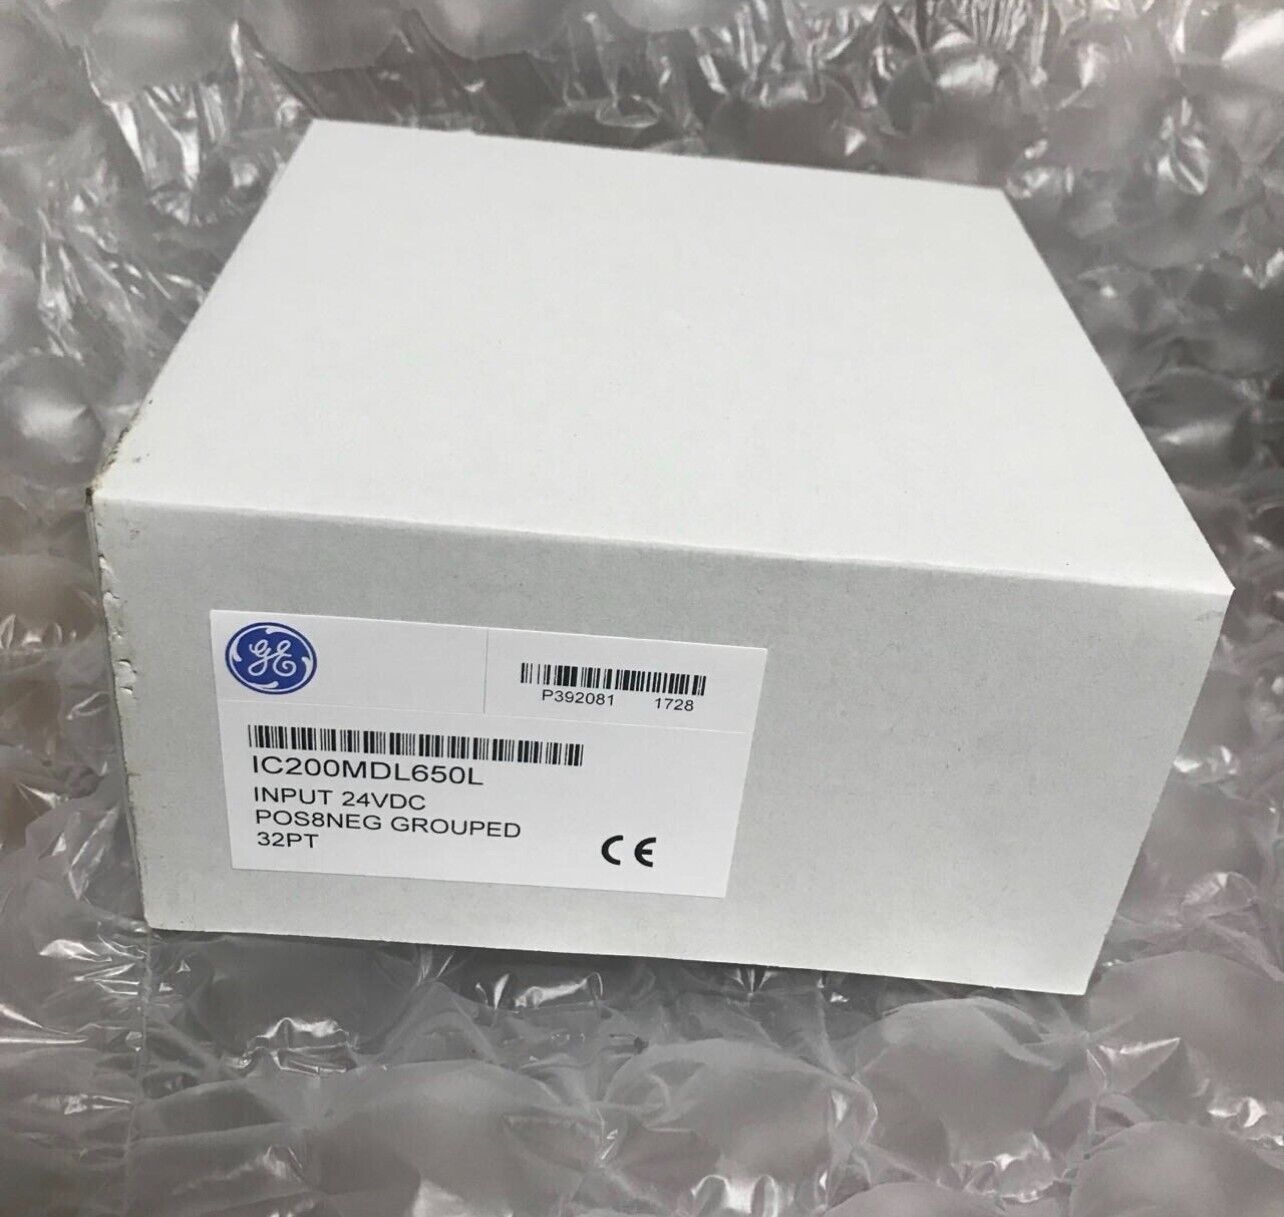 New Factory Sealed GE FANUC IC200MDL650 PLC Module Fast Ship